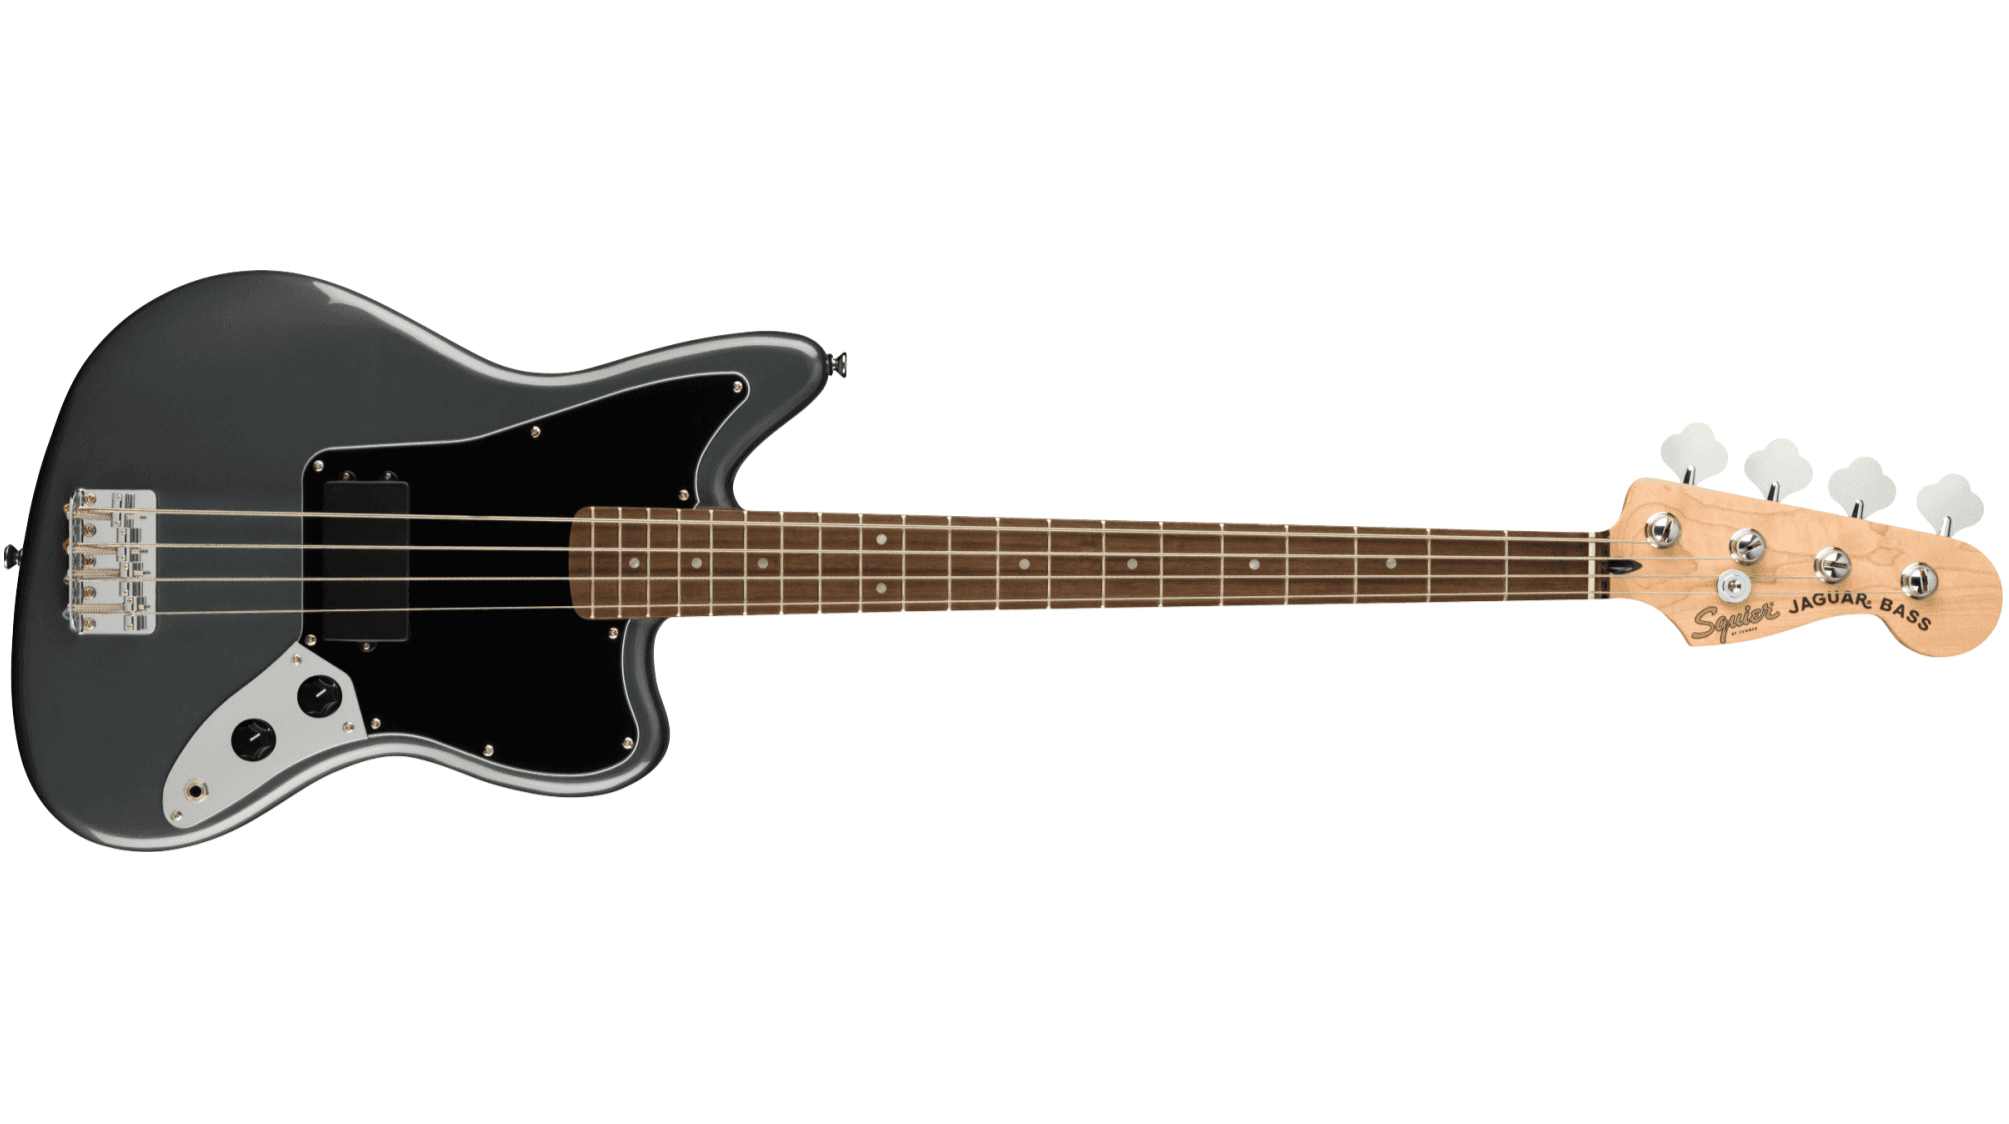 Best gifts for bass players: Squier Affinity Jaguar bass